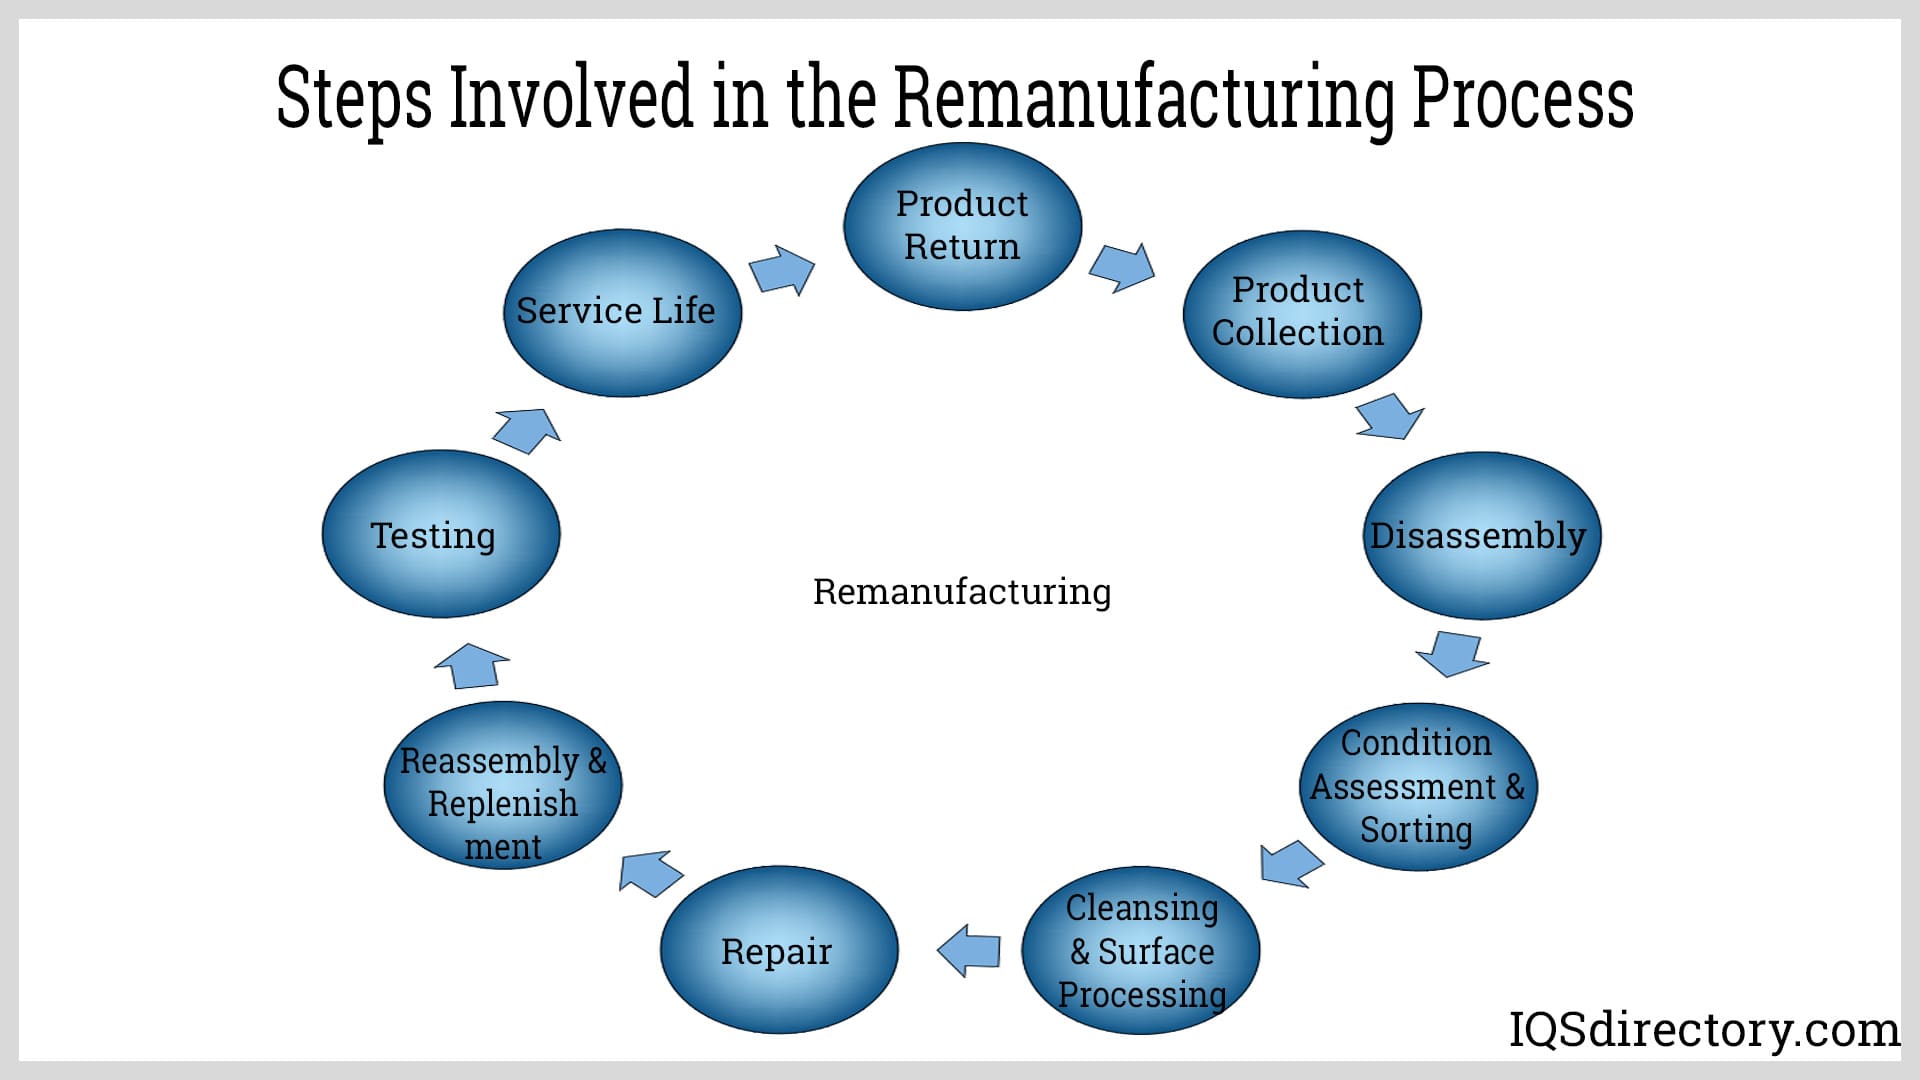 Steps Involved in the Remanufacturing Process